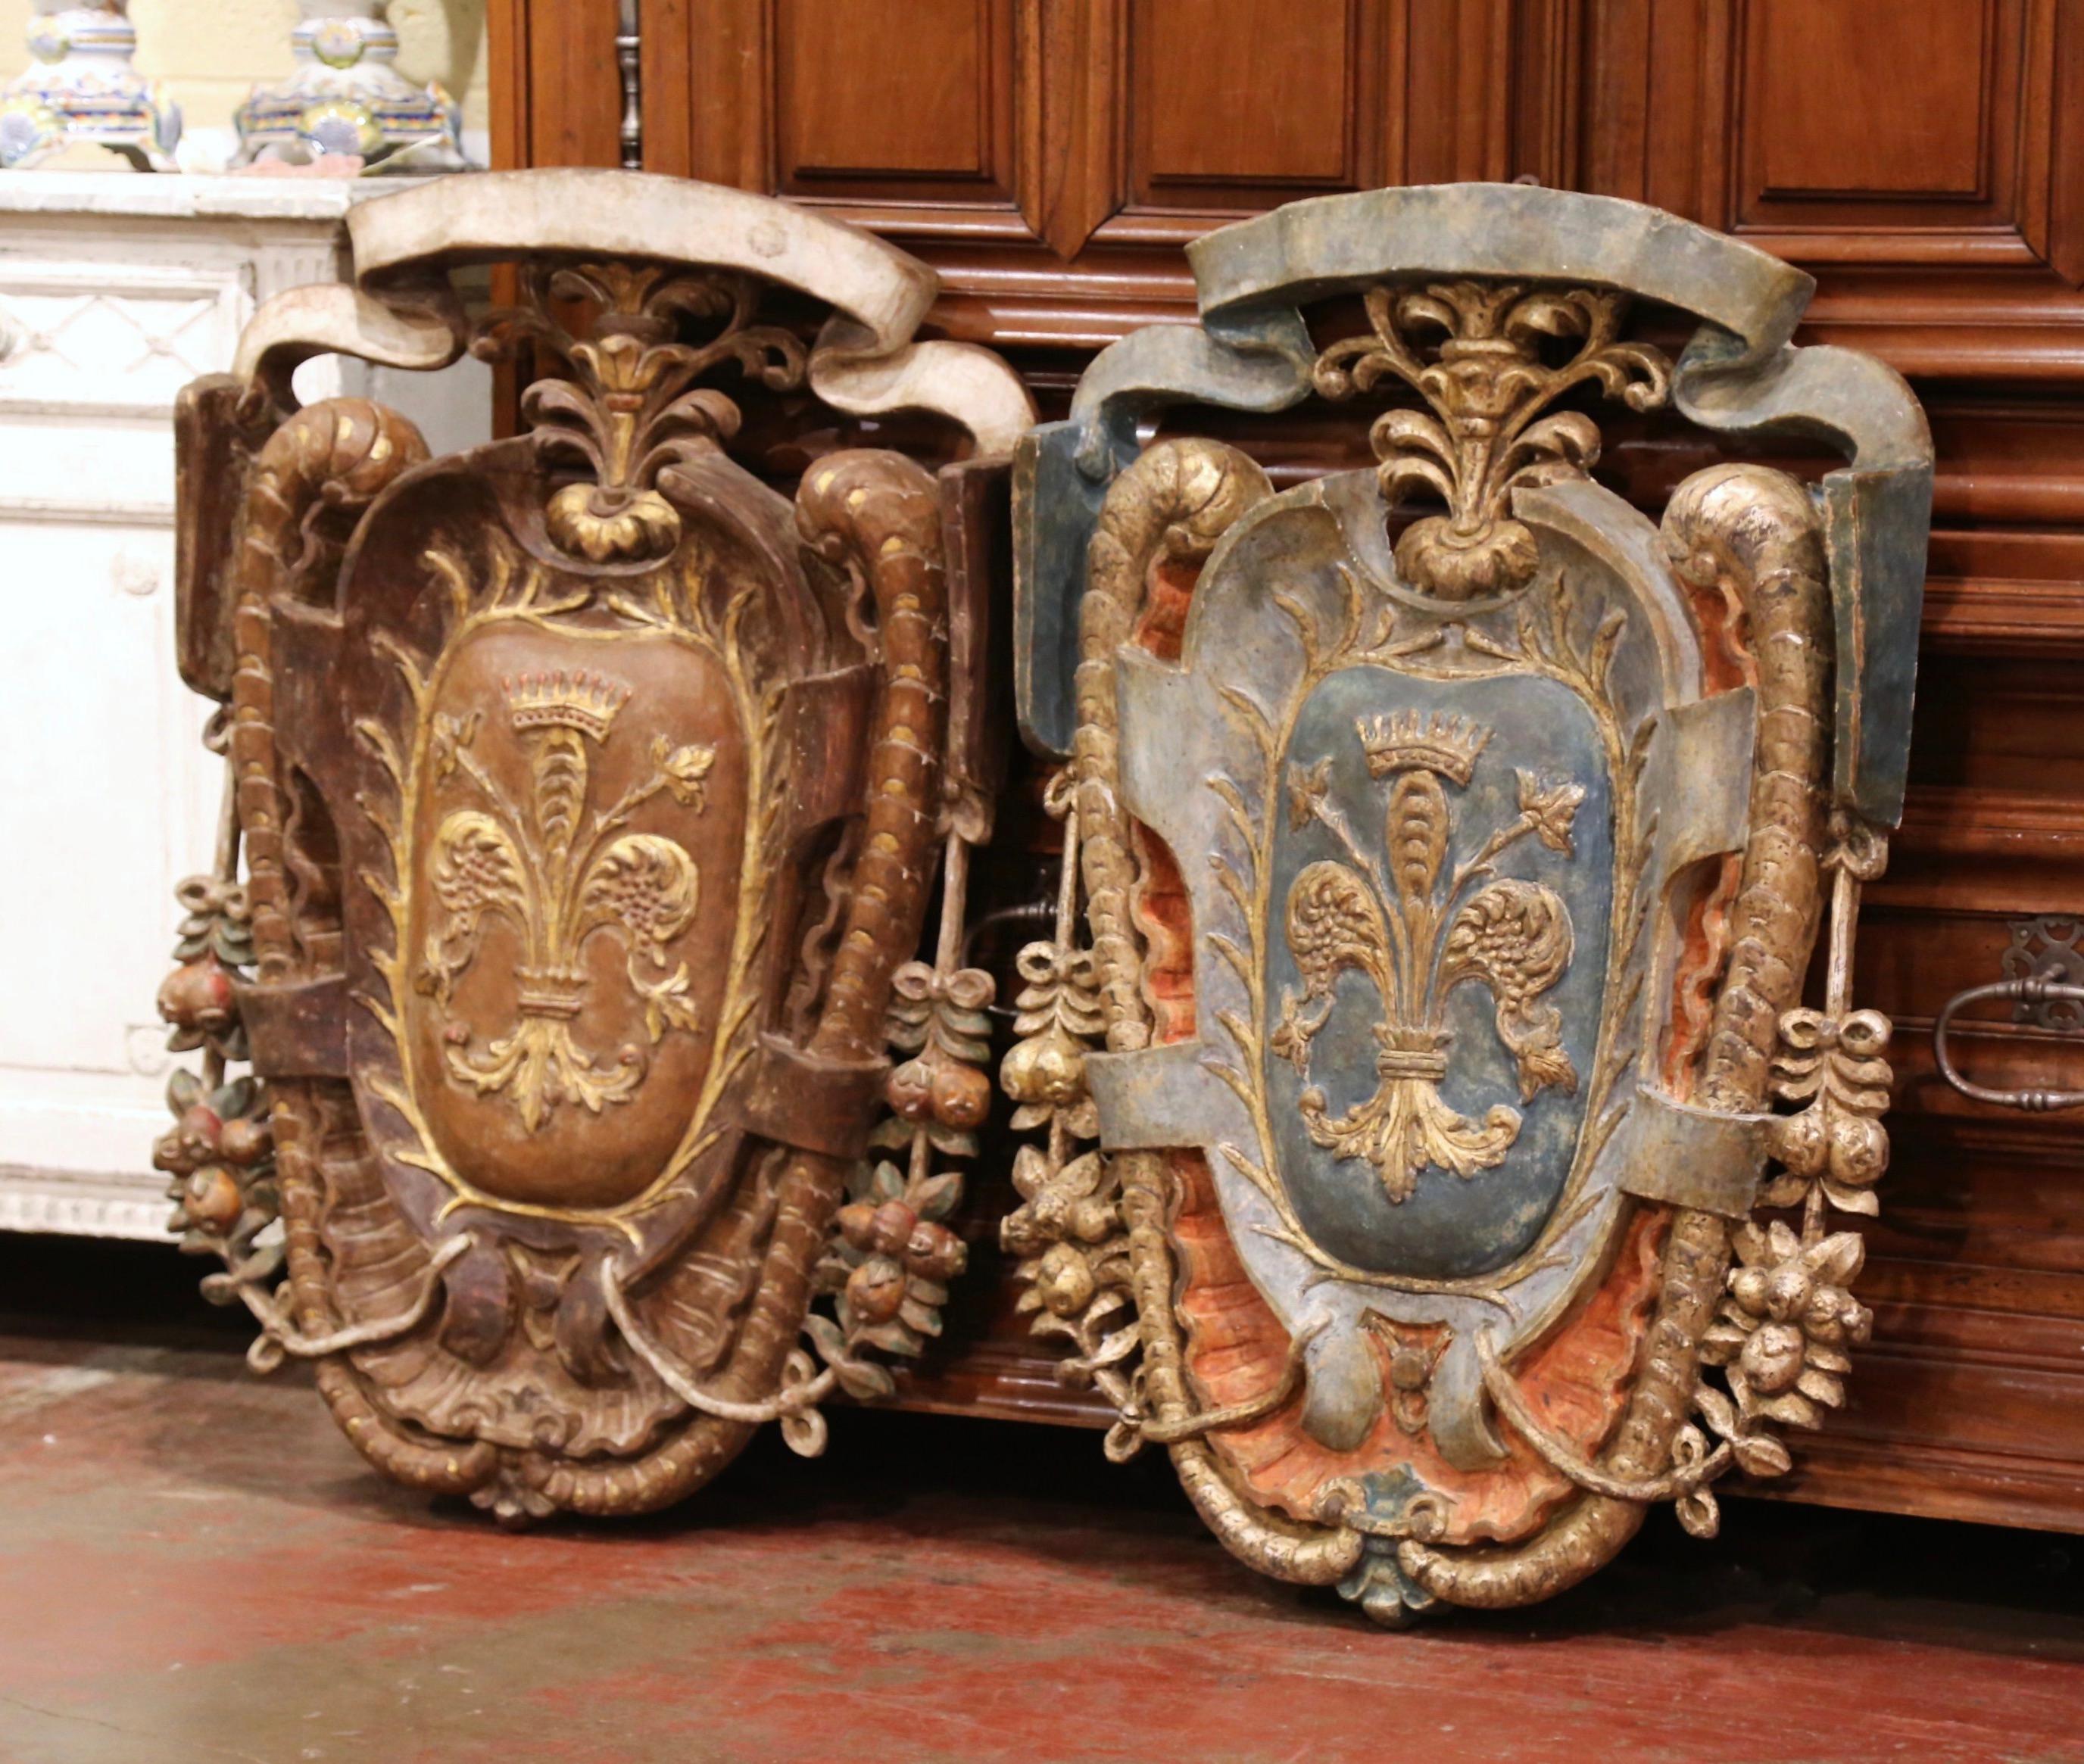 Decorate a study or library with this important pair of antique shields. Hand crafted in Italy, circa 1920, each traditional crest is heavily carved with fruit and foliage motifs over a pierced floral decor at the pediment. The large wall decors